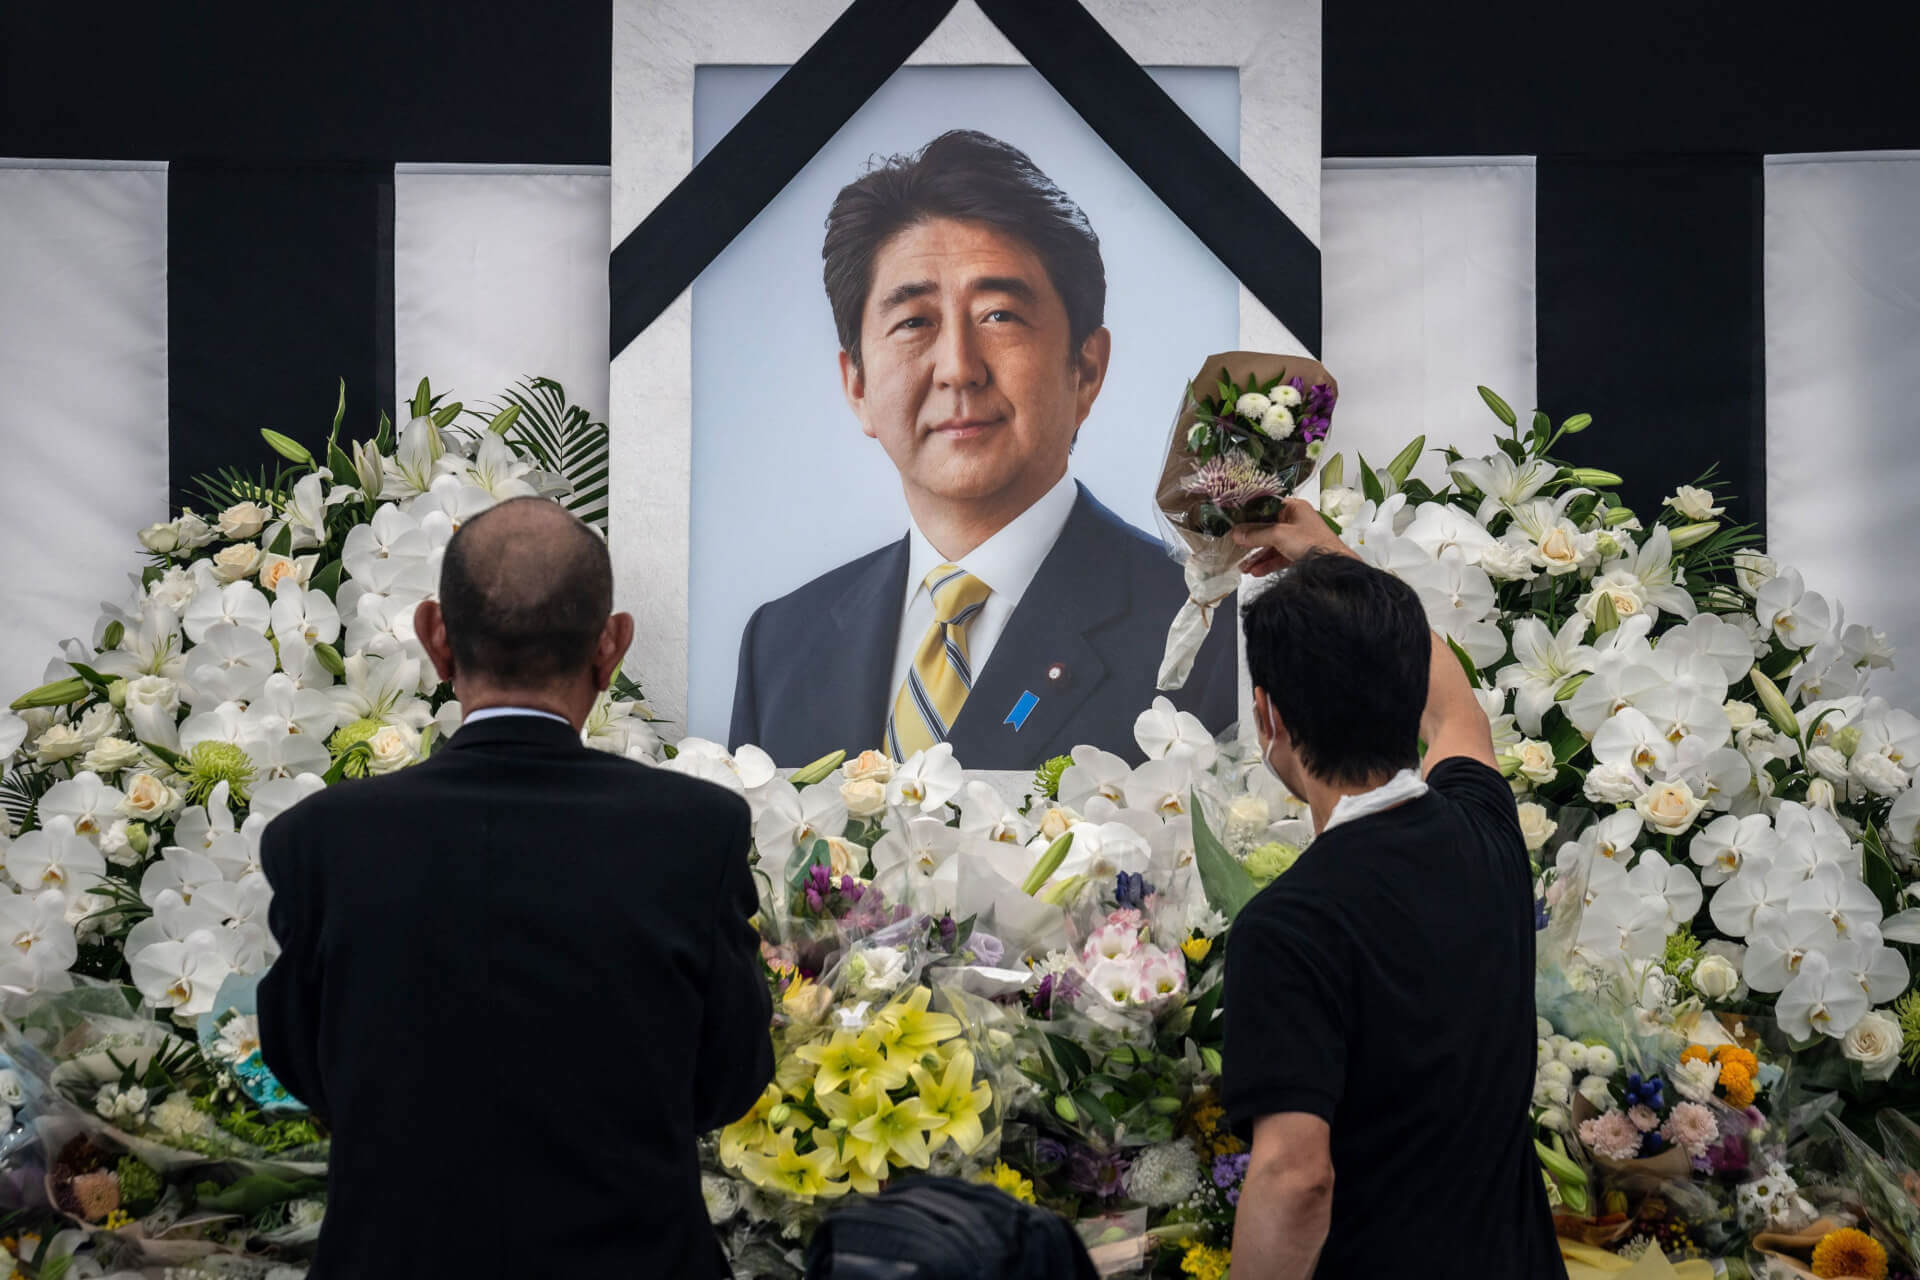 Japan Holds State Funeral for Ex-PM Shinzo Abe Amid Protests Over Cost, Church Links